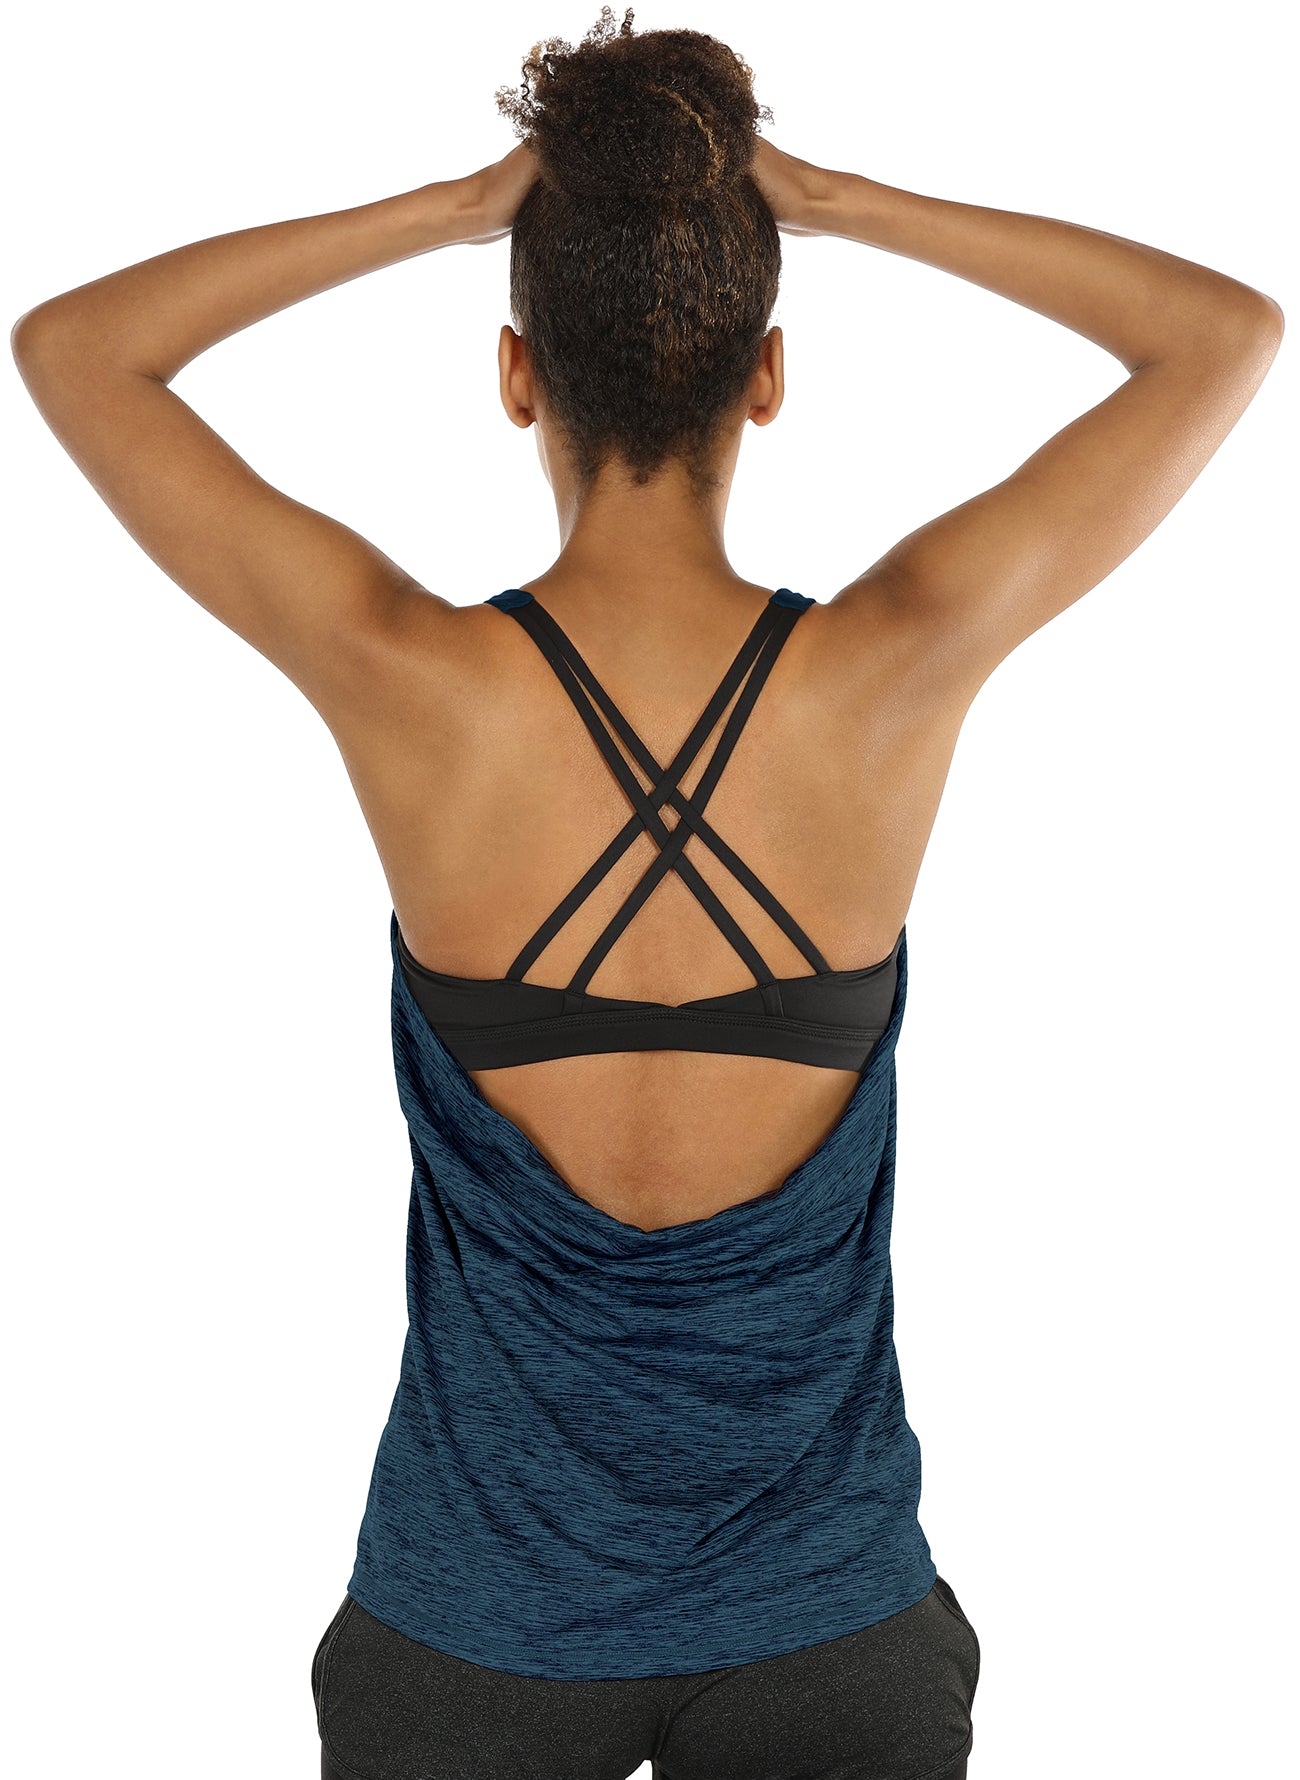 TK1A icyzone Workout Tank Tops Built in Bra - Women's Strappy Athletic –  icyzonesports